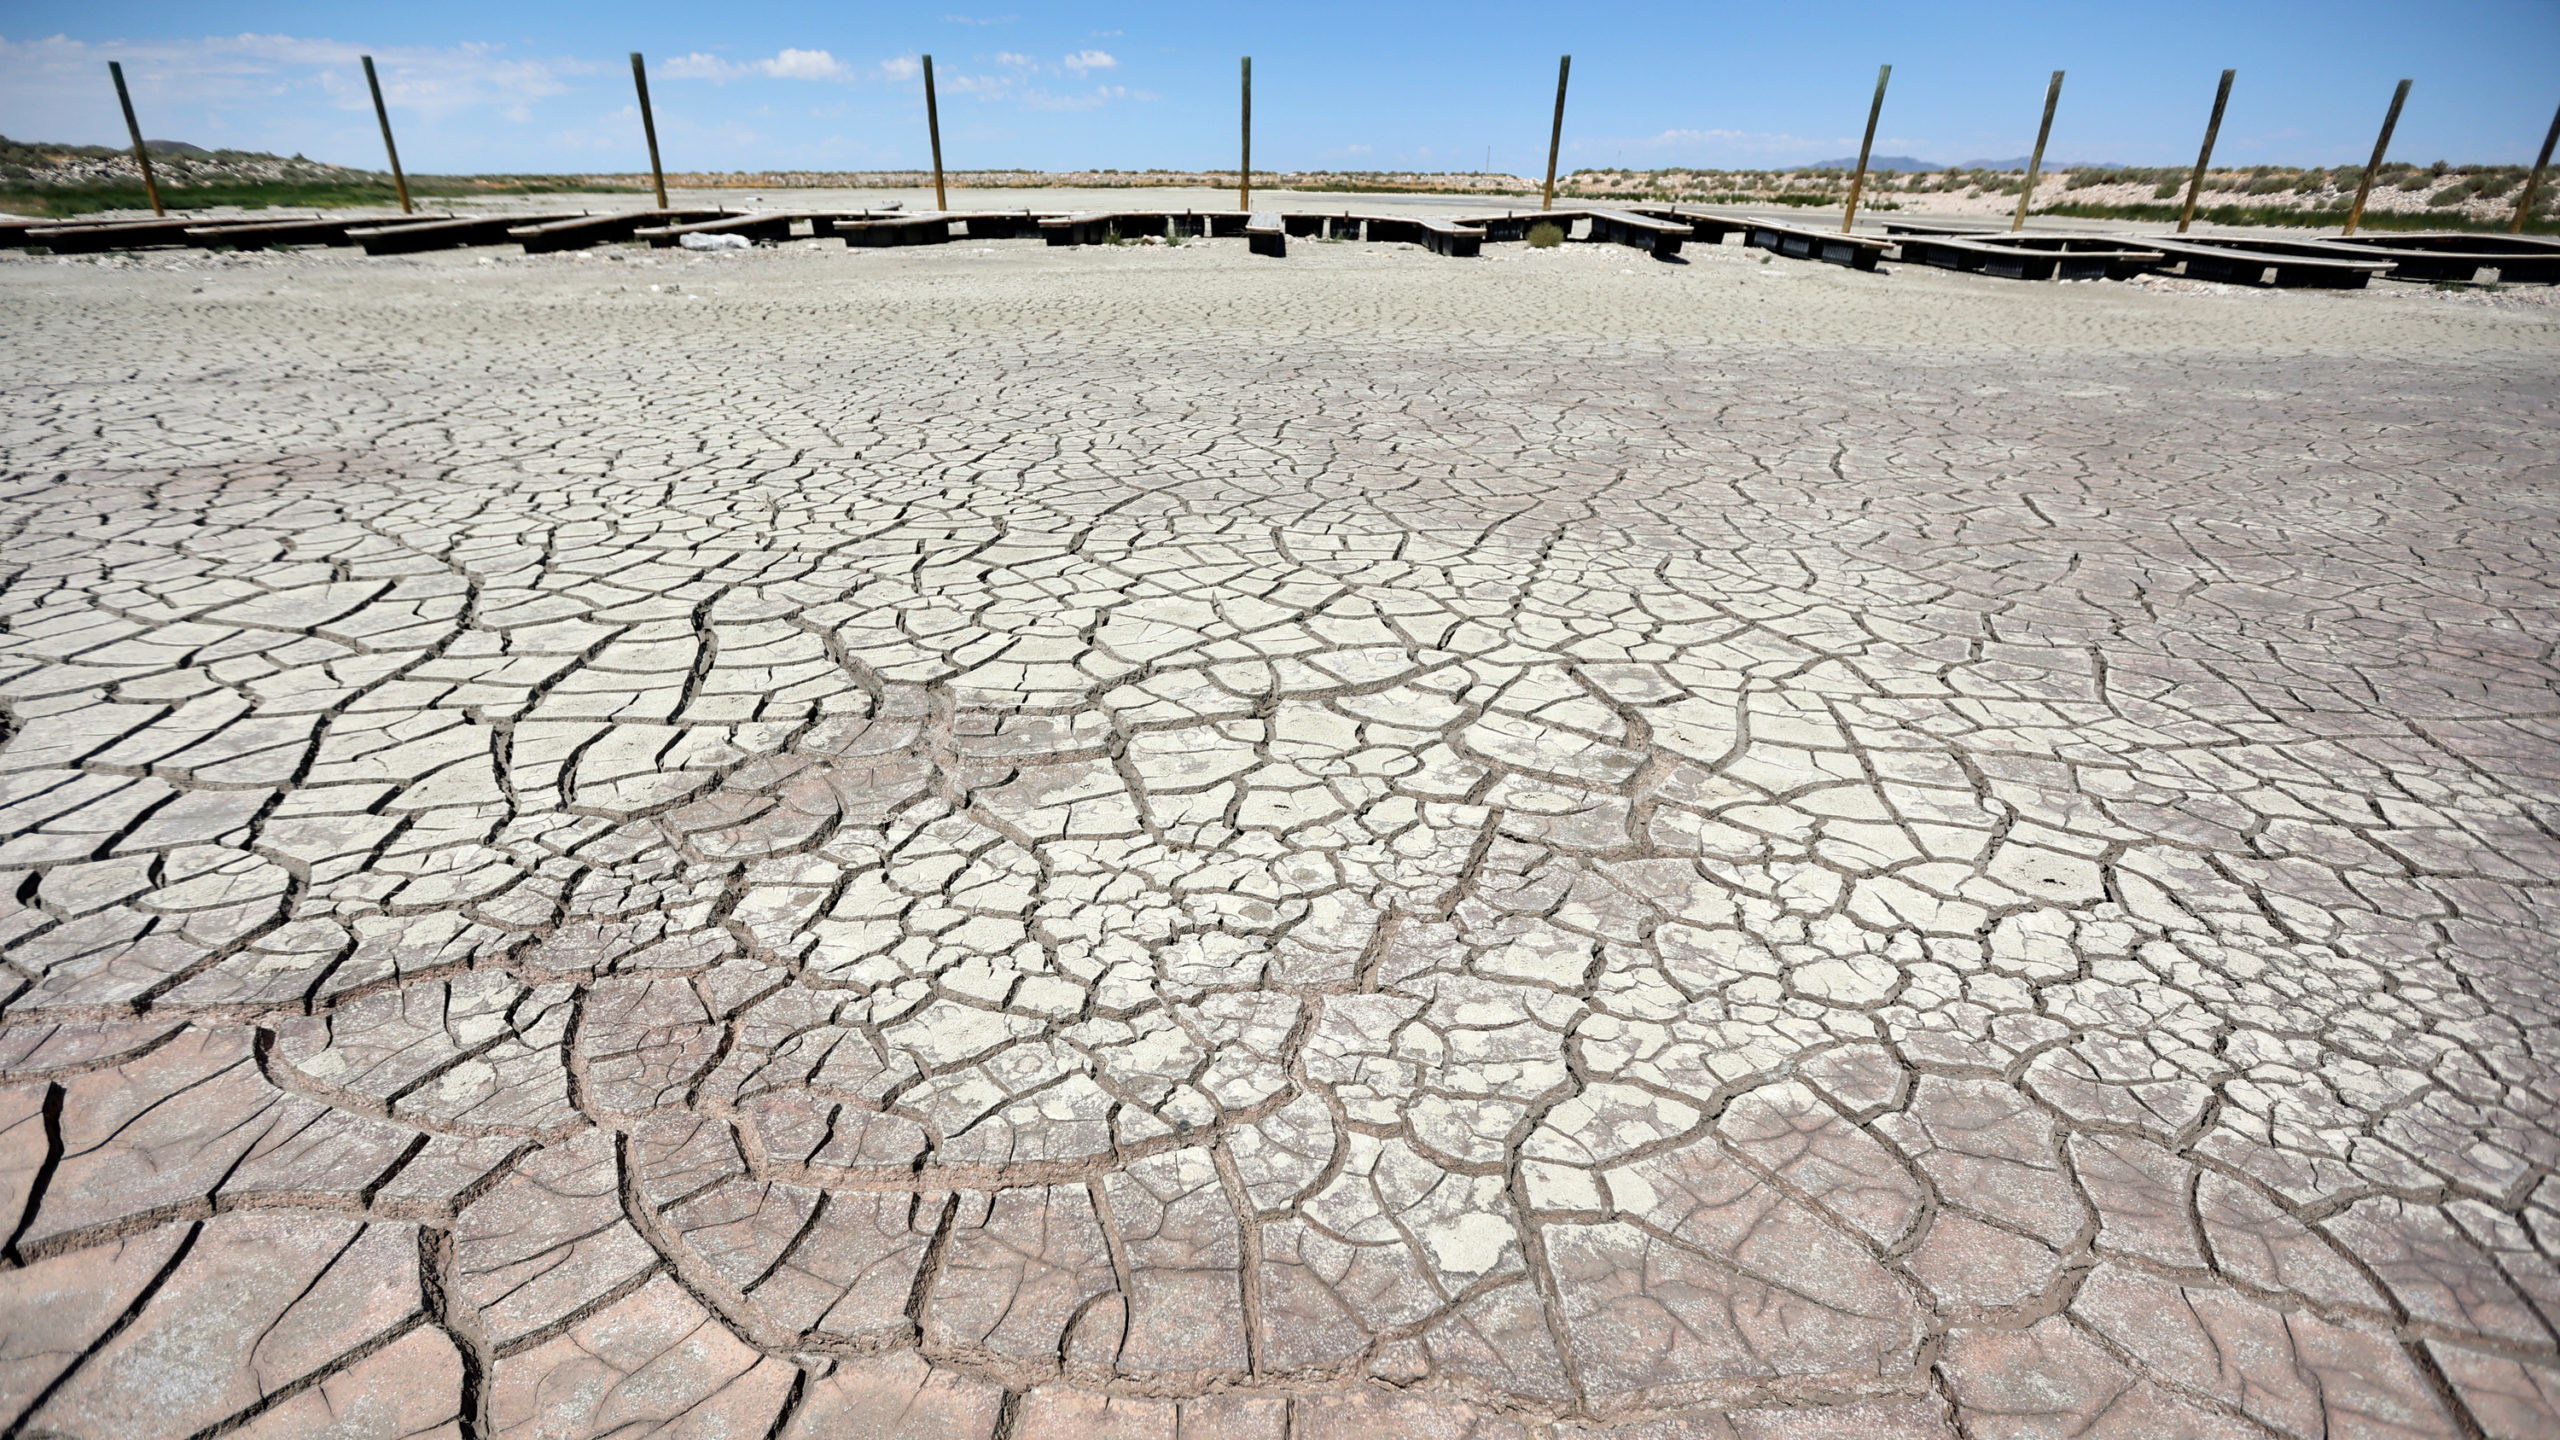 farmers drought The dried Antelope Island marina at the Great Salt Lake is pictured....